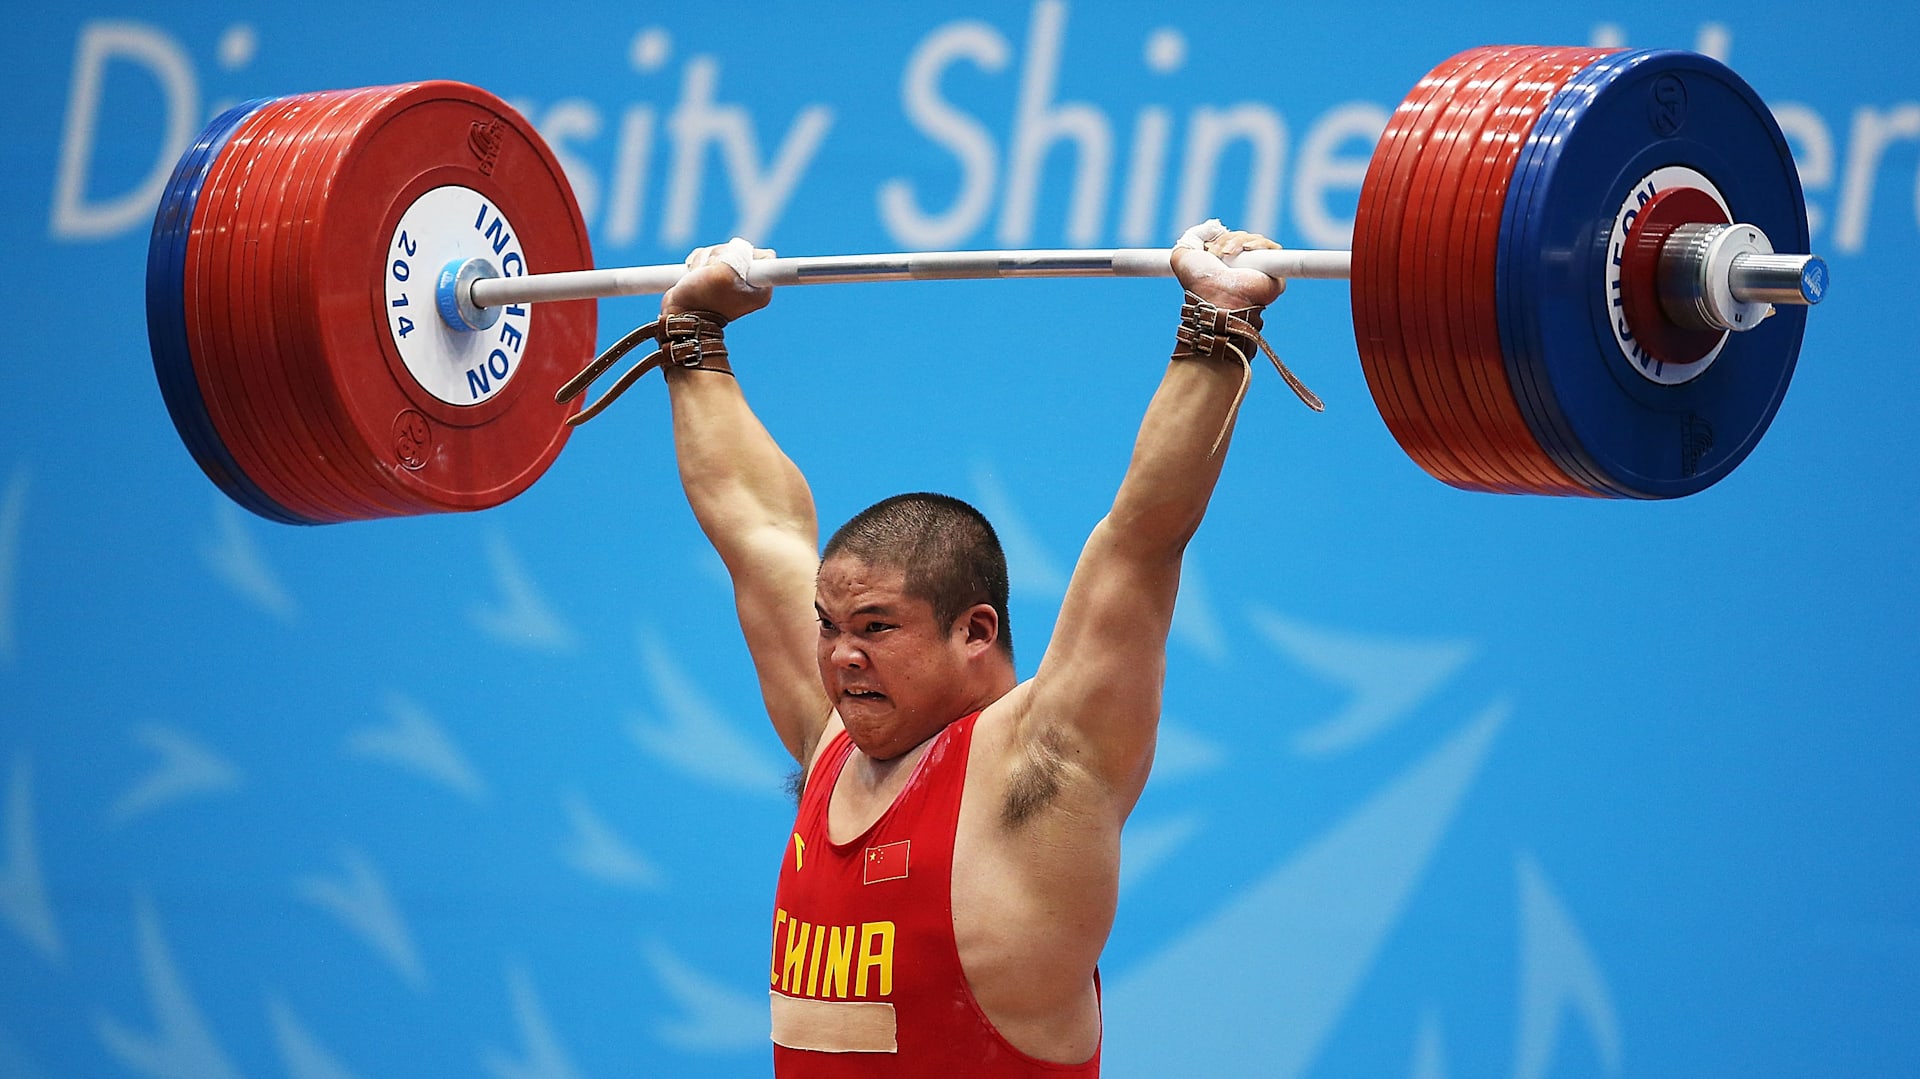 My View on Olympic Weightlifting for Athletic Development in Team